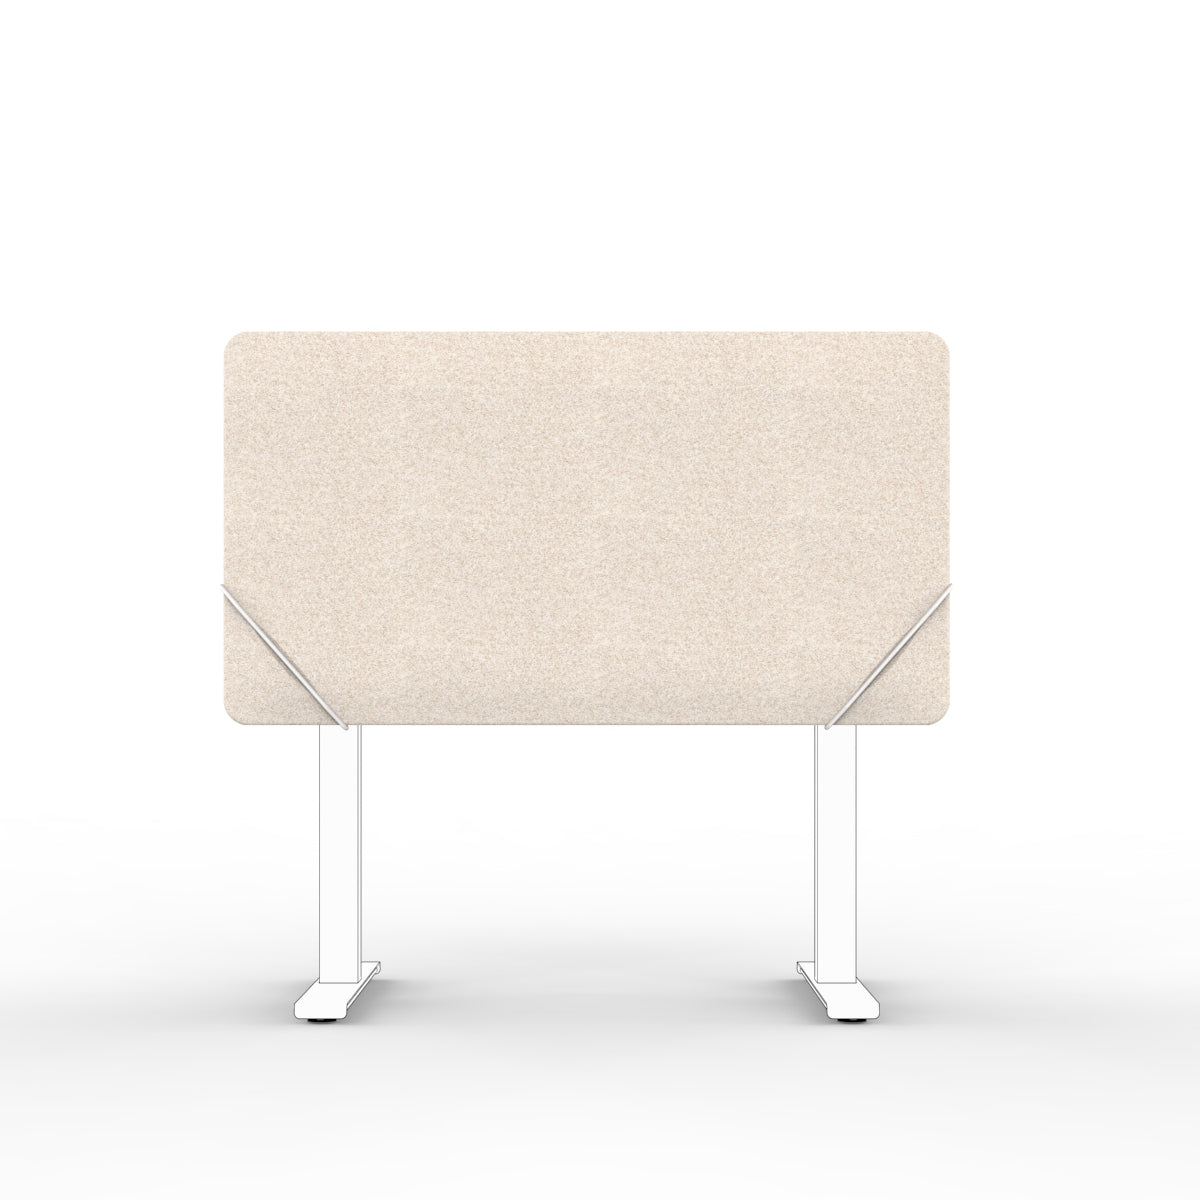 Table screen sound absorber in natural beige wool felt with white slide on table mounts. 